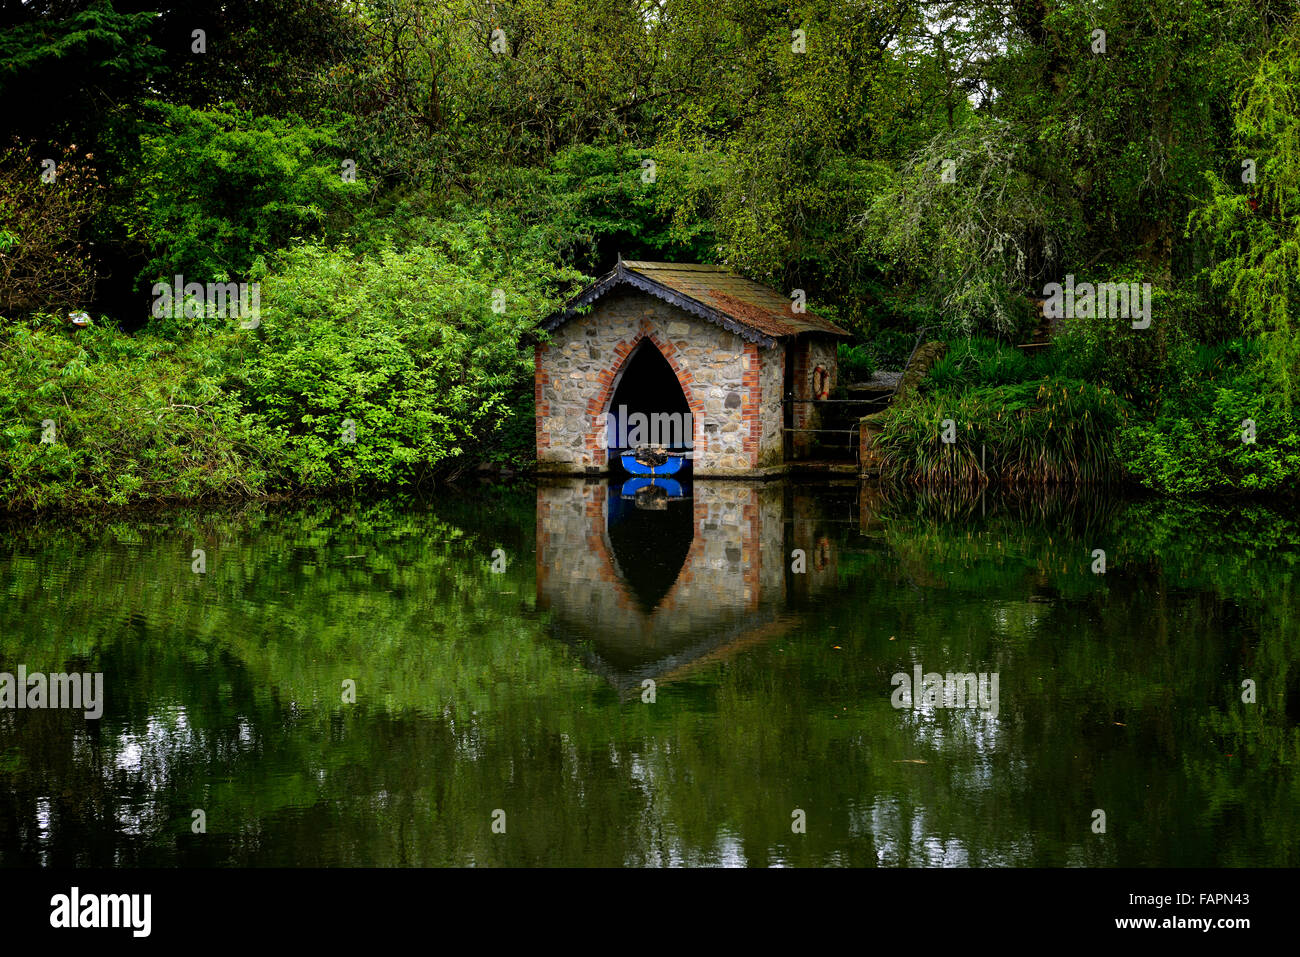 Boathouse lake pond blue boat brick shed housing reflect reflection still tranquil garden gardening feature RM Floral Stock Photo